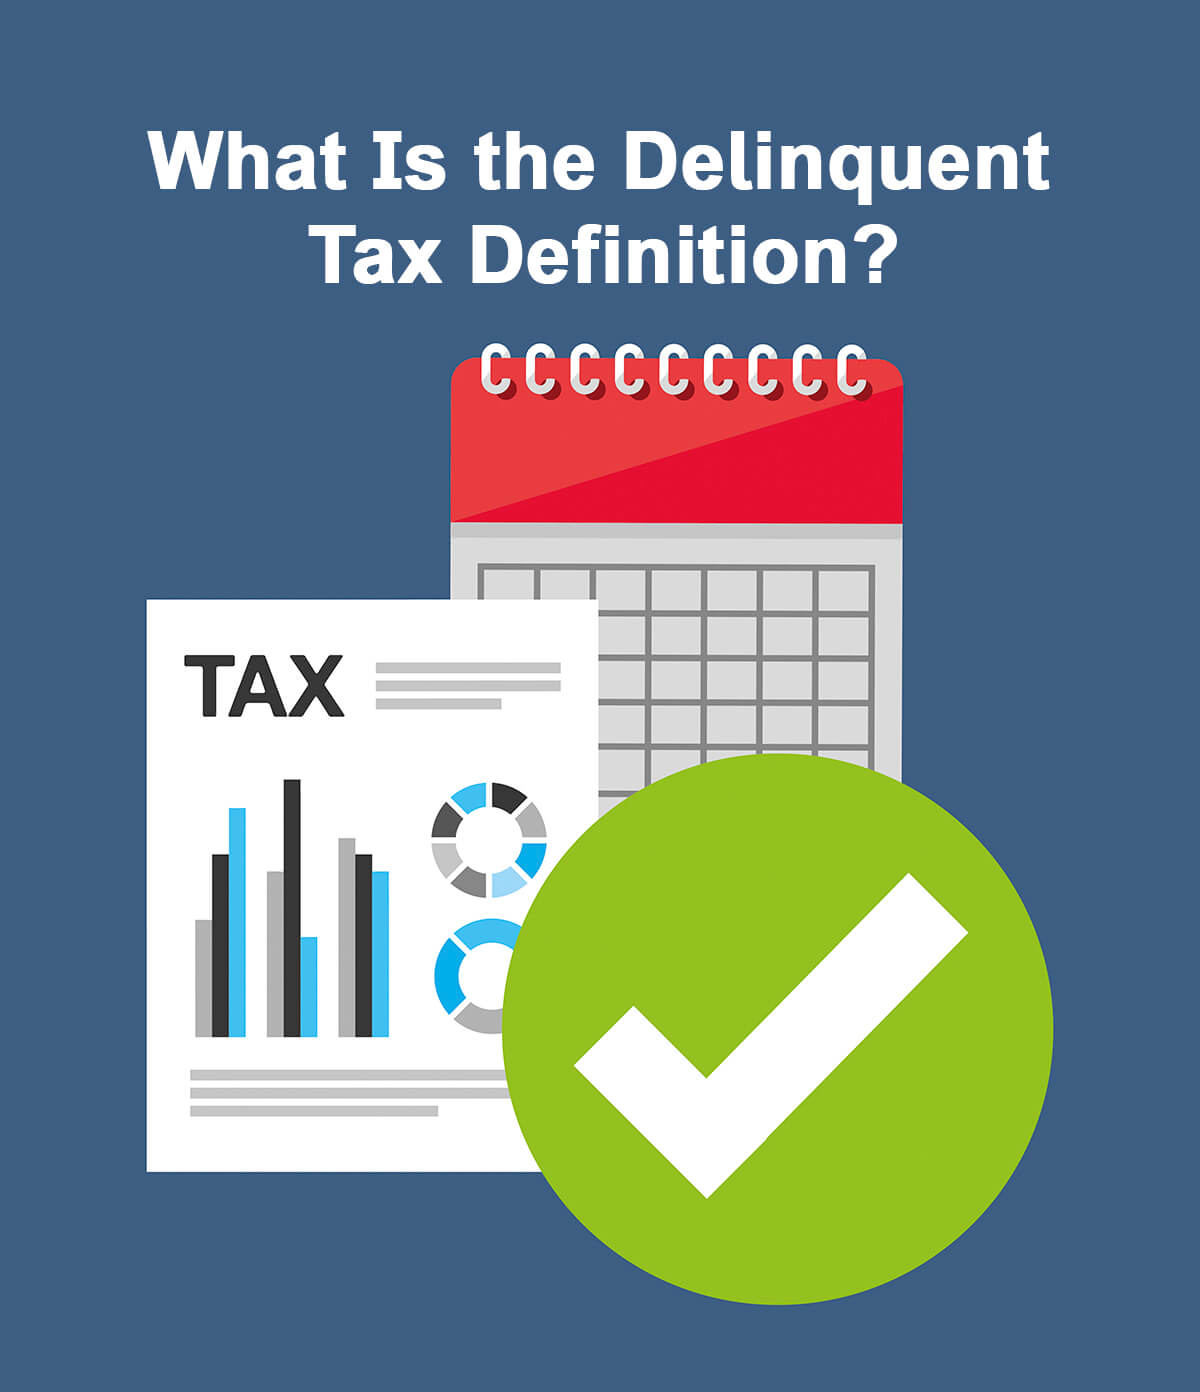 What Is the Delinquent Tax Definition?